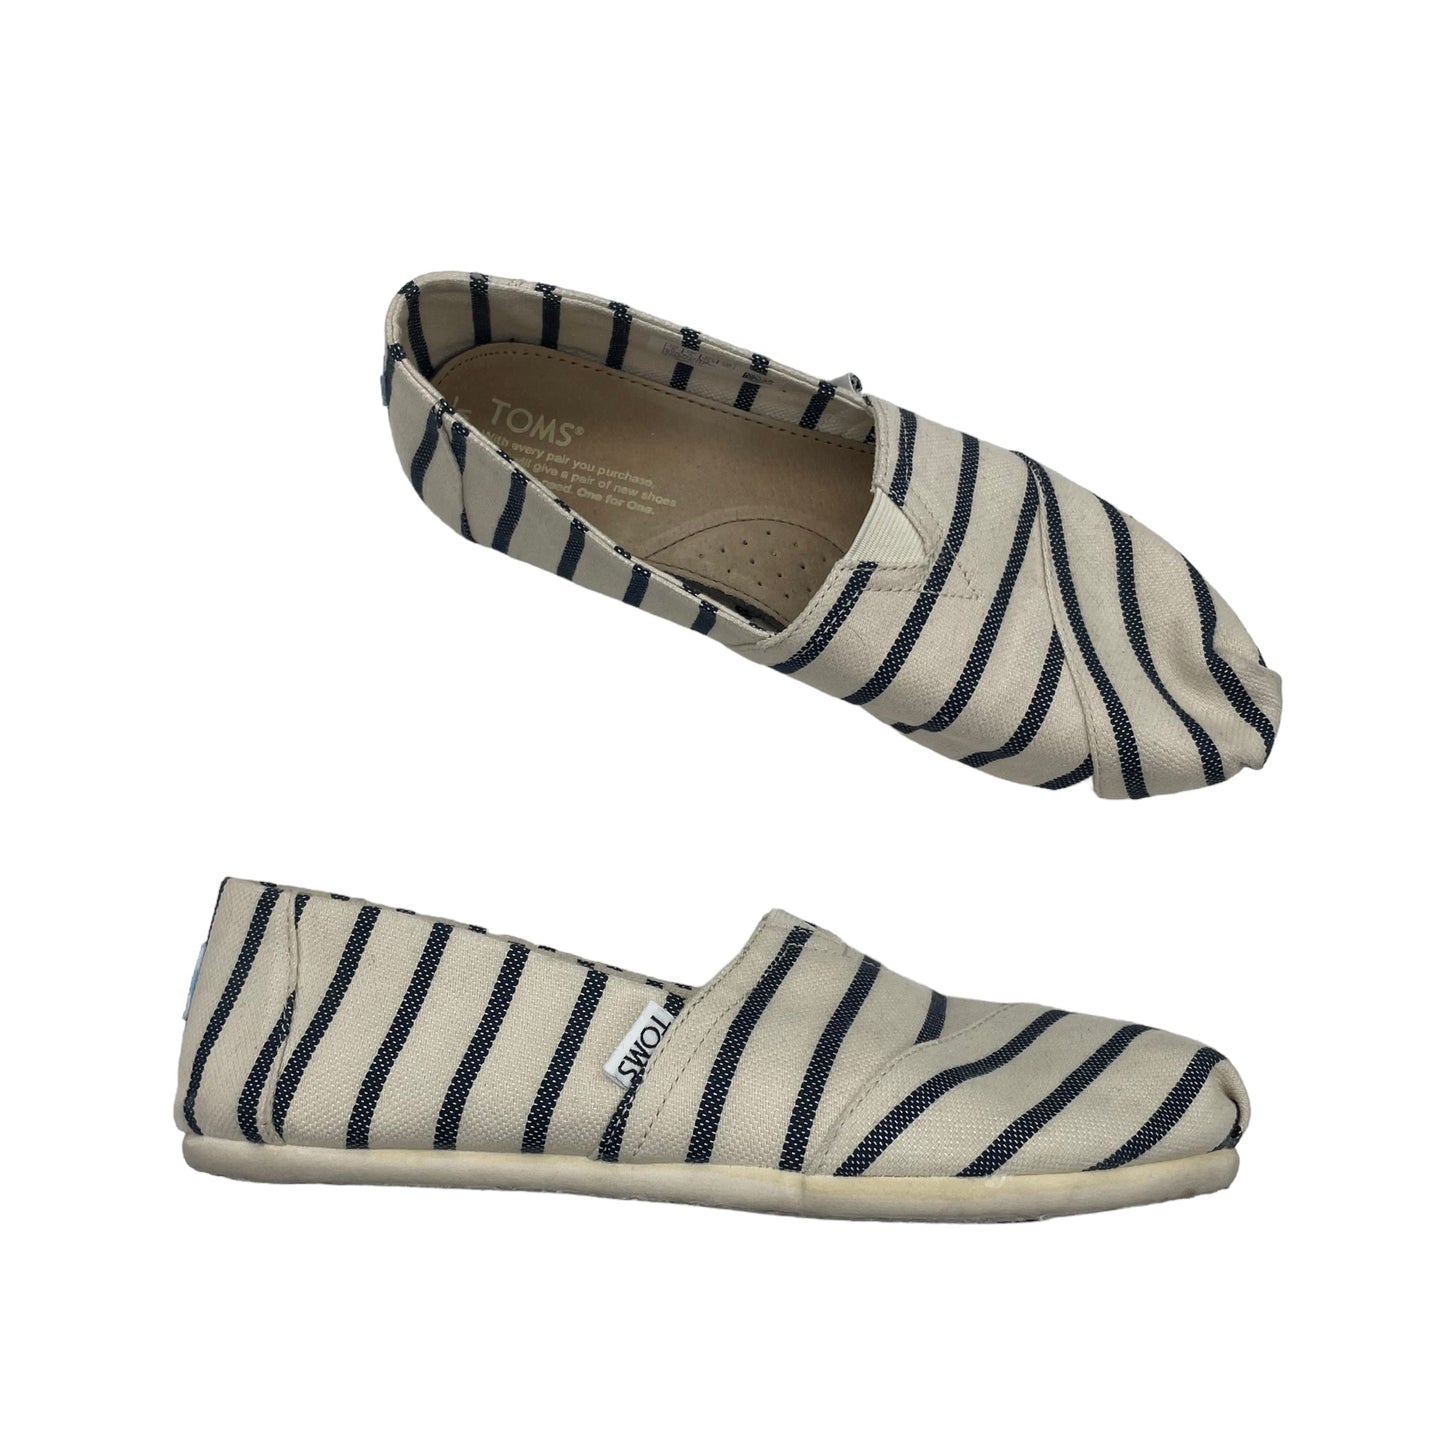 Shoes Sneakers By Toms  Size: 8